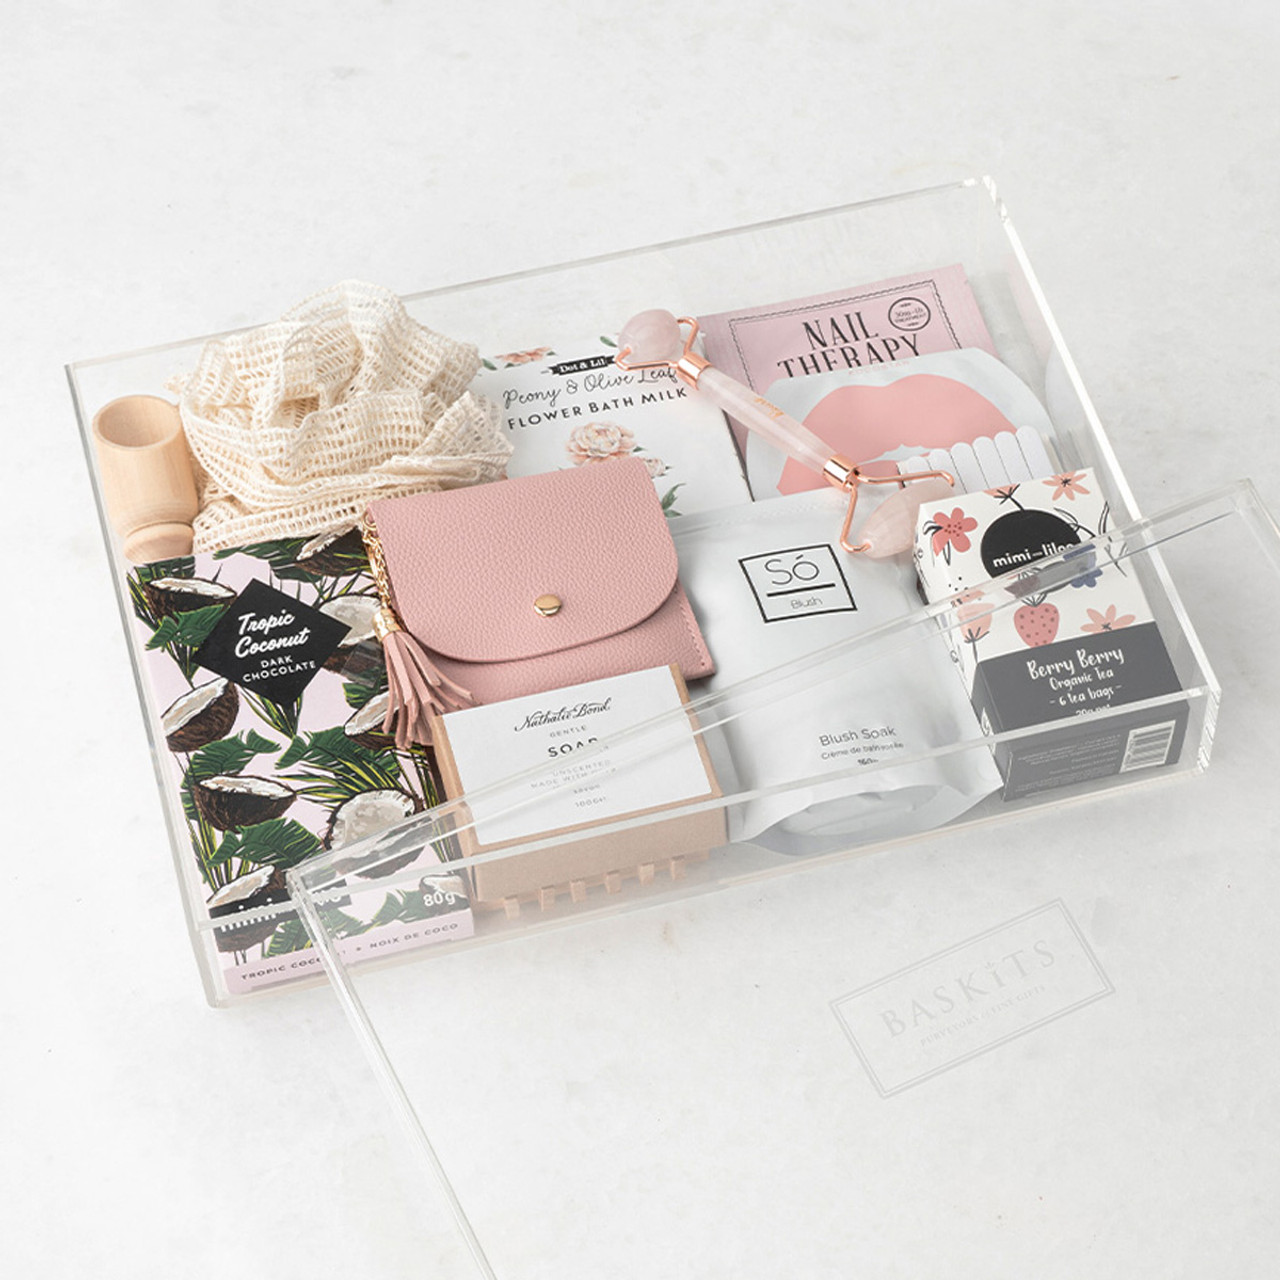 Luxe Serenity gift box for her